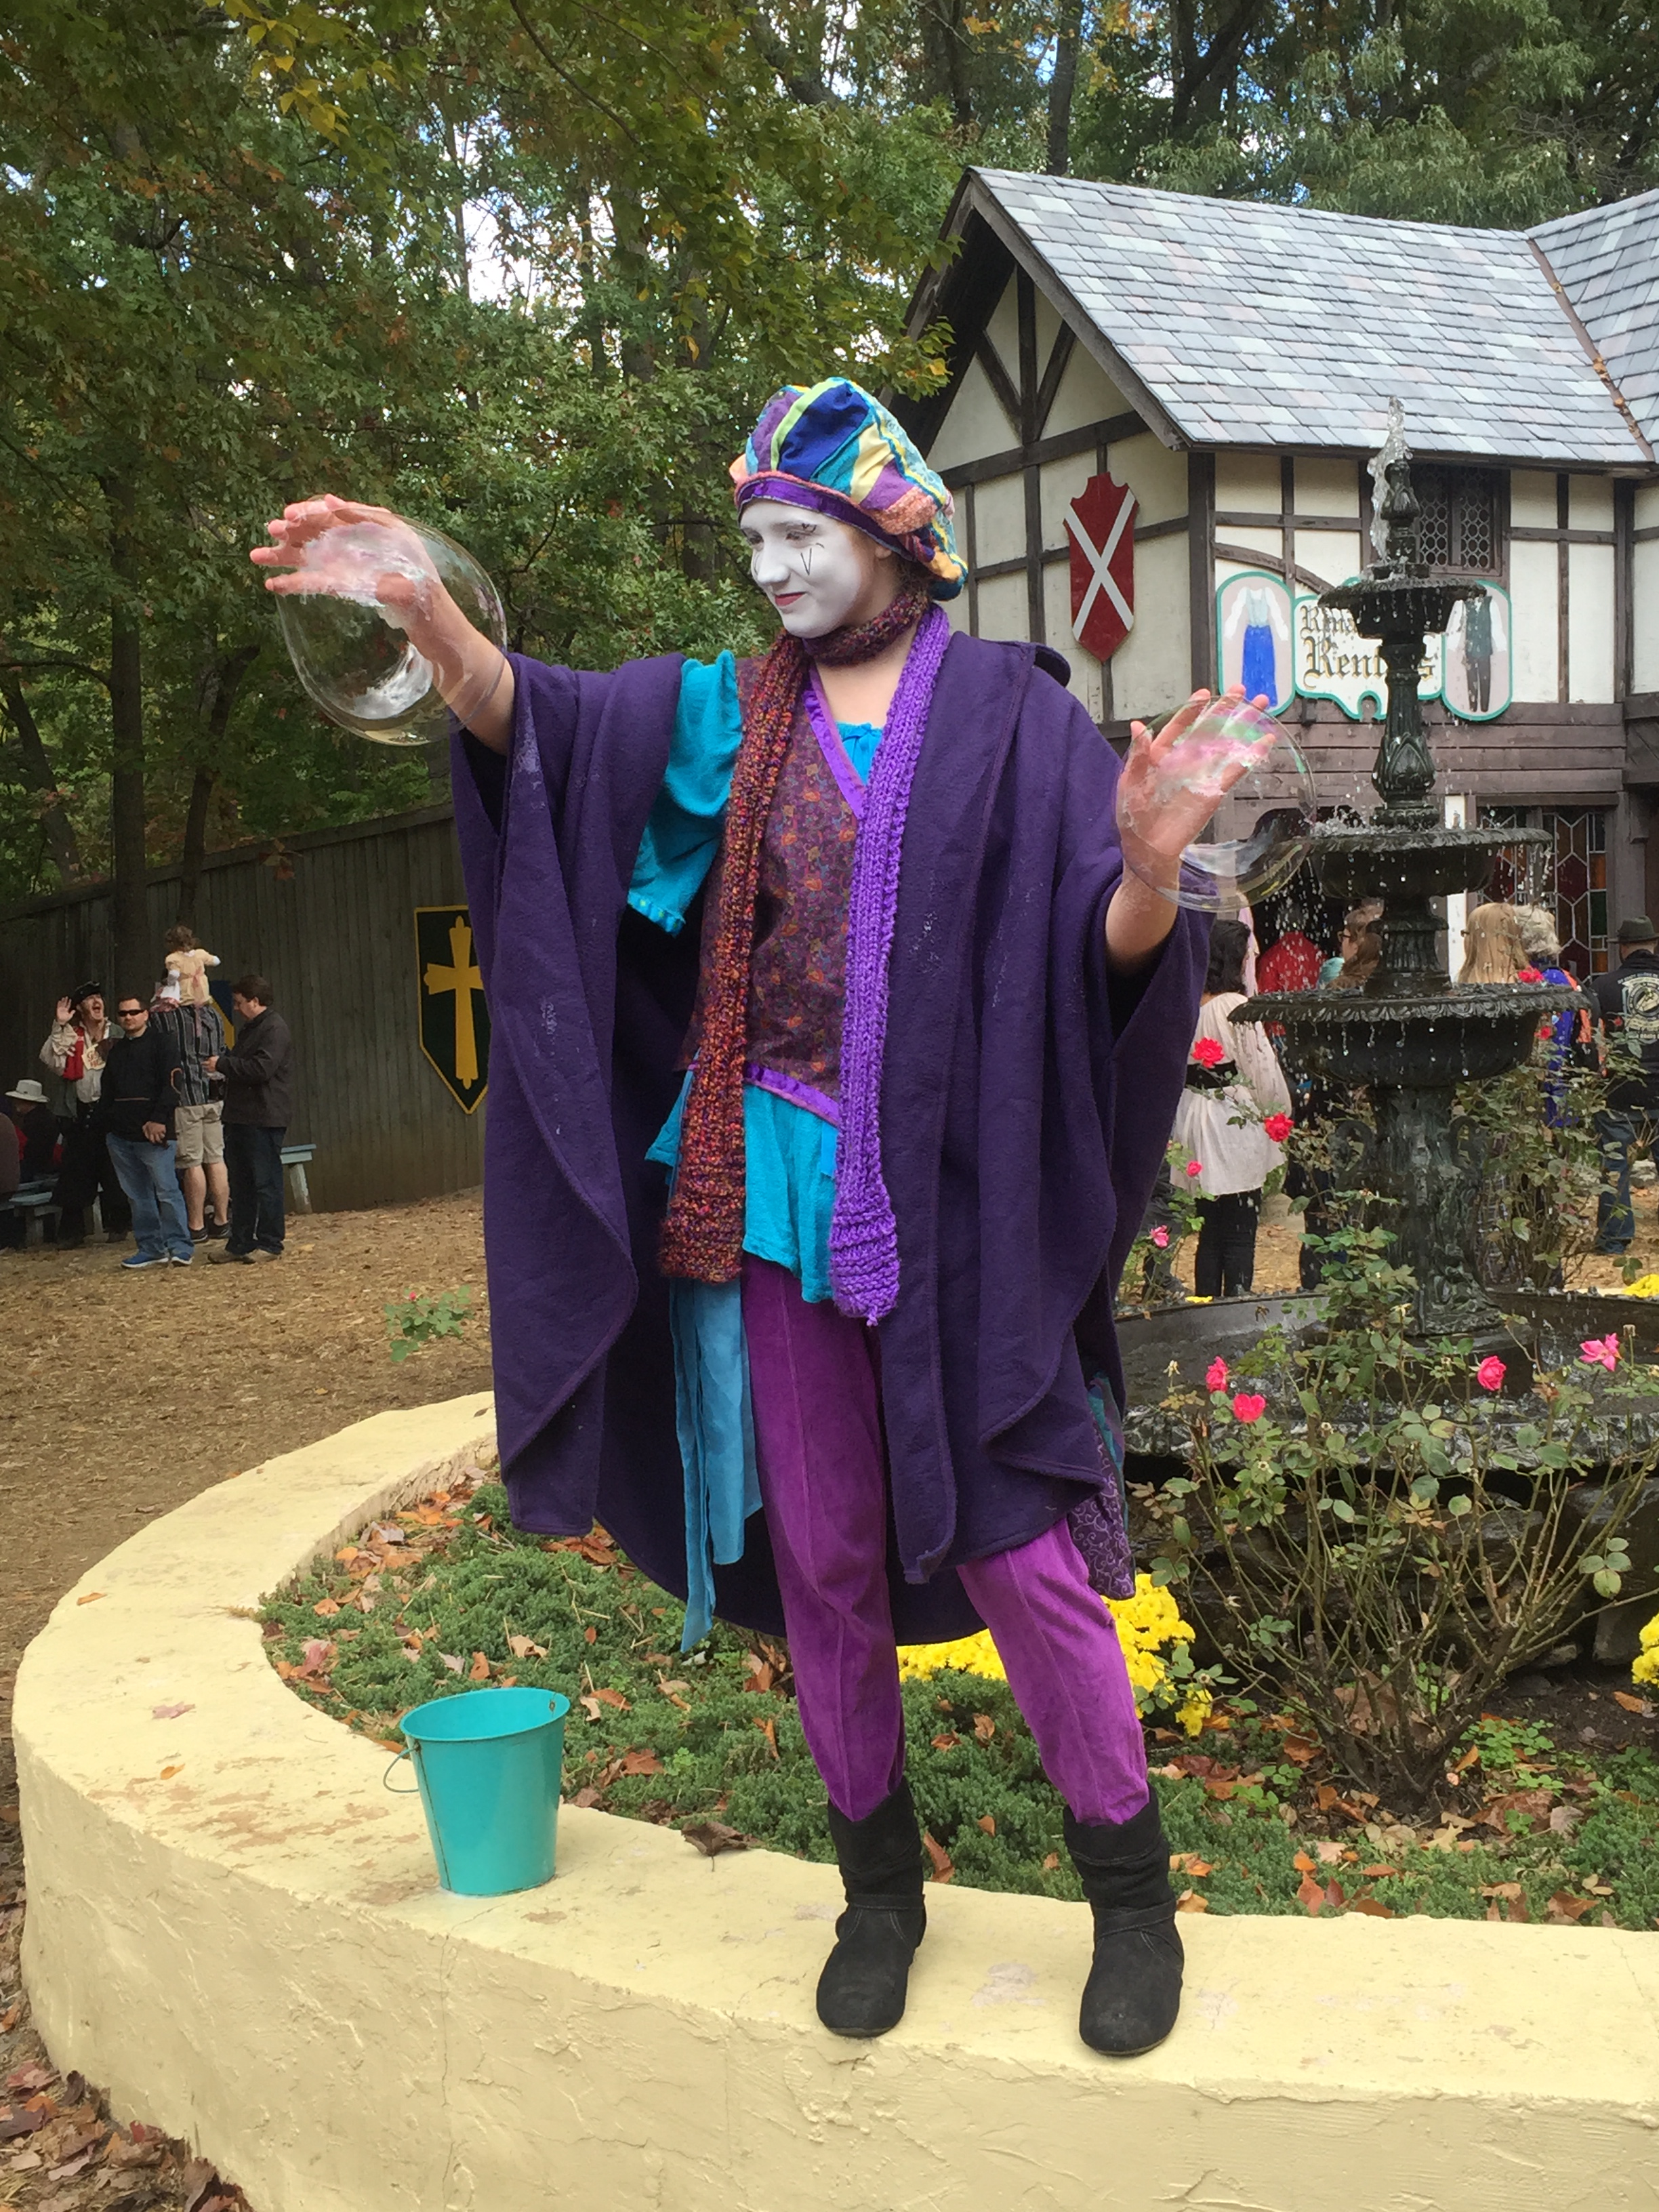 Jester dressed in multi-colored clothing blowing bubbles using only her hands